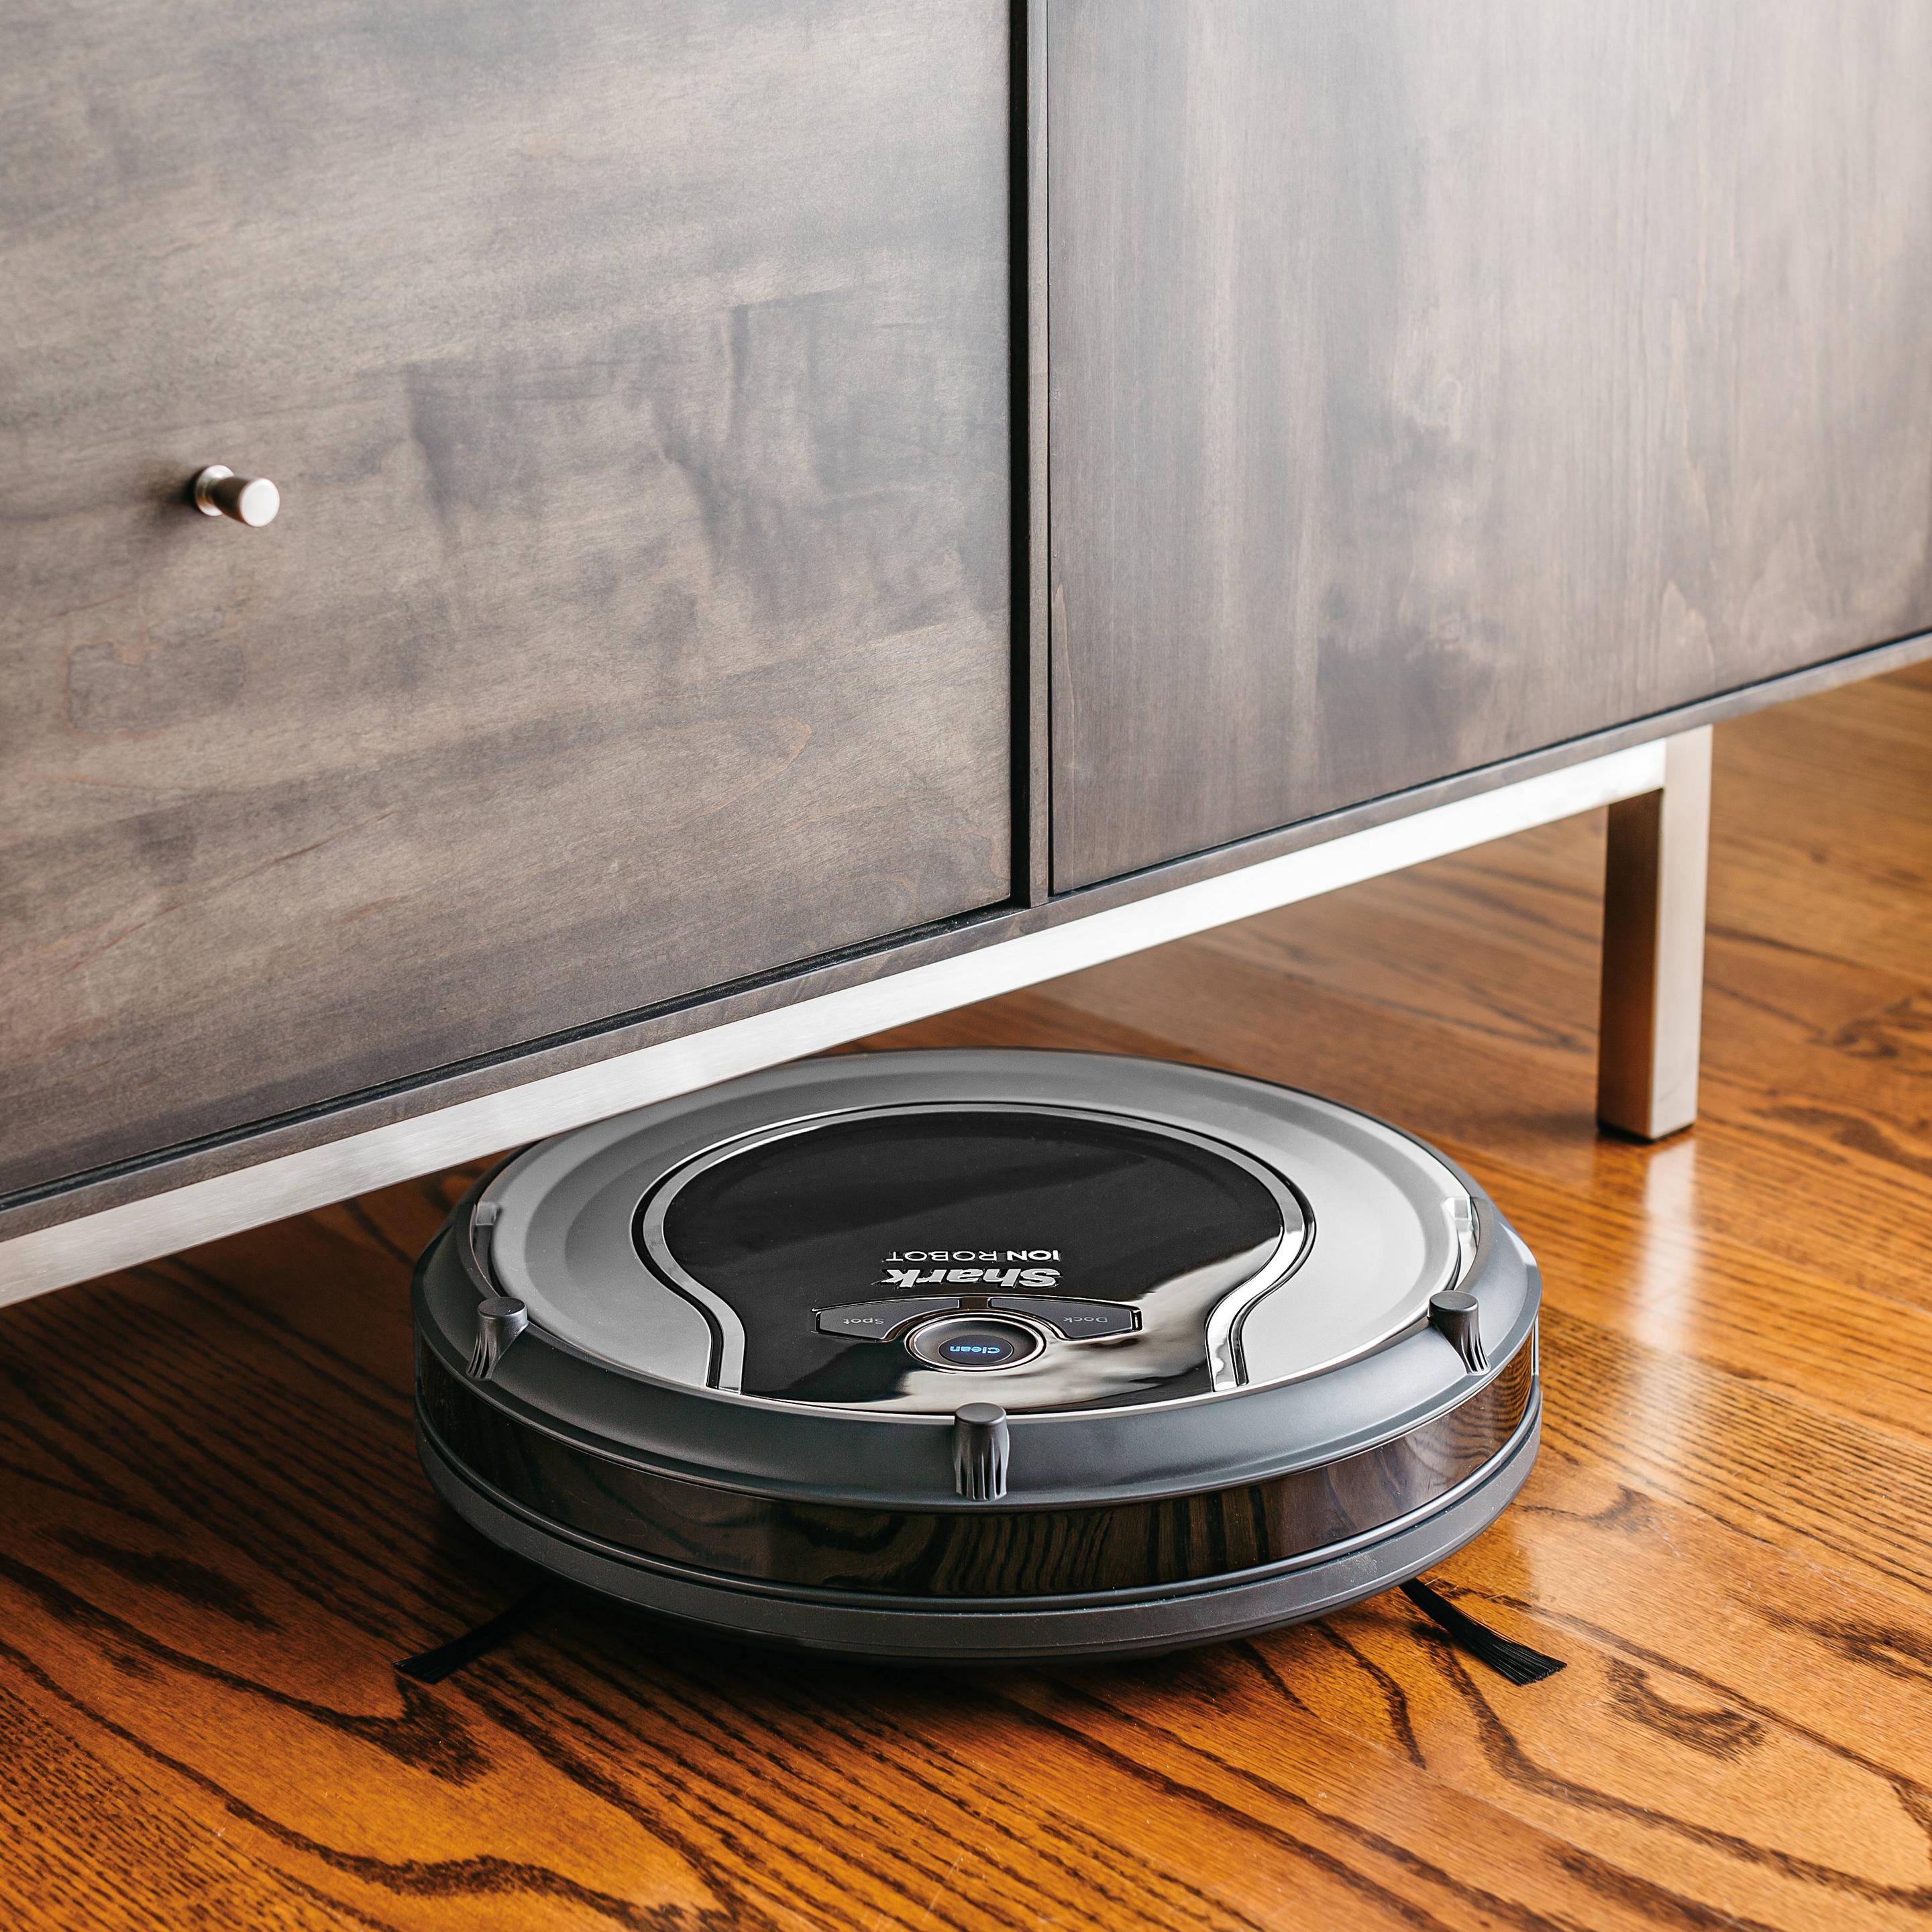 Shark ION RV700 Robot Vacuum with Easy Scheduling Remote - image 6 of 8